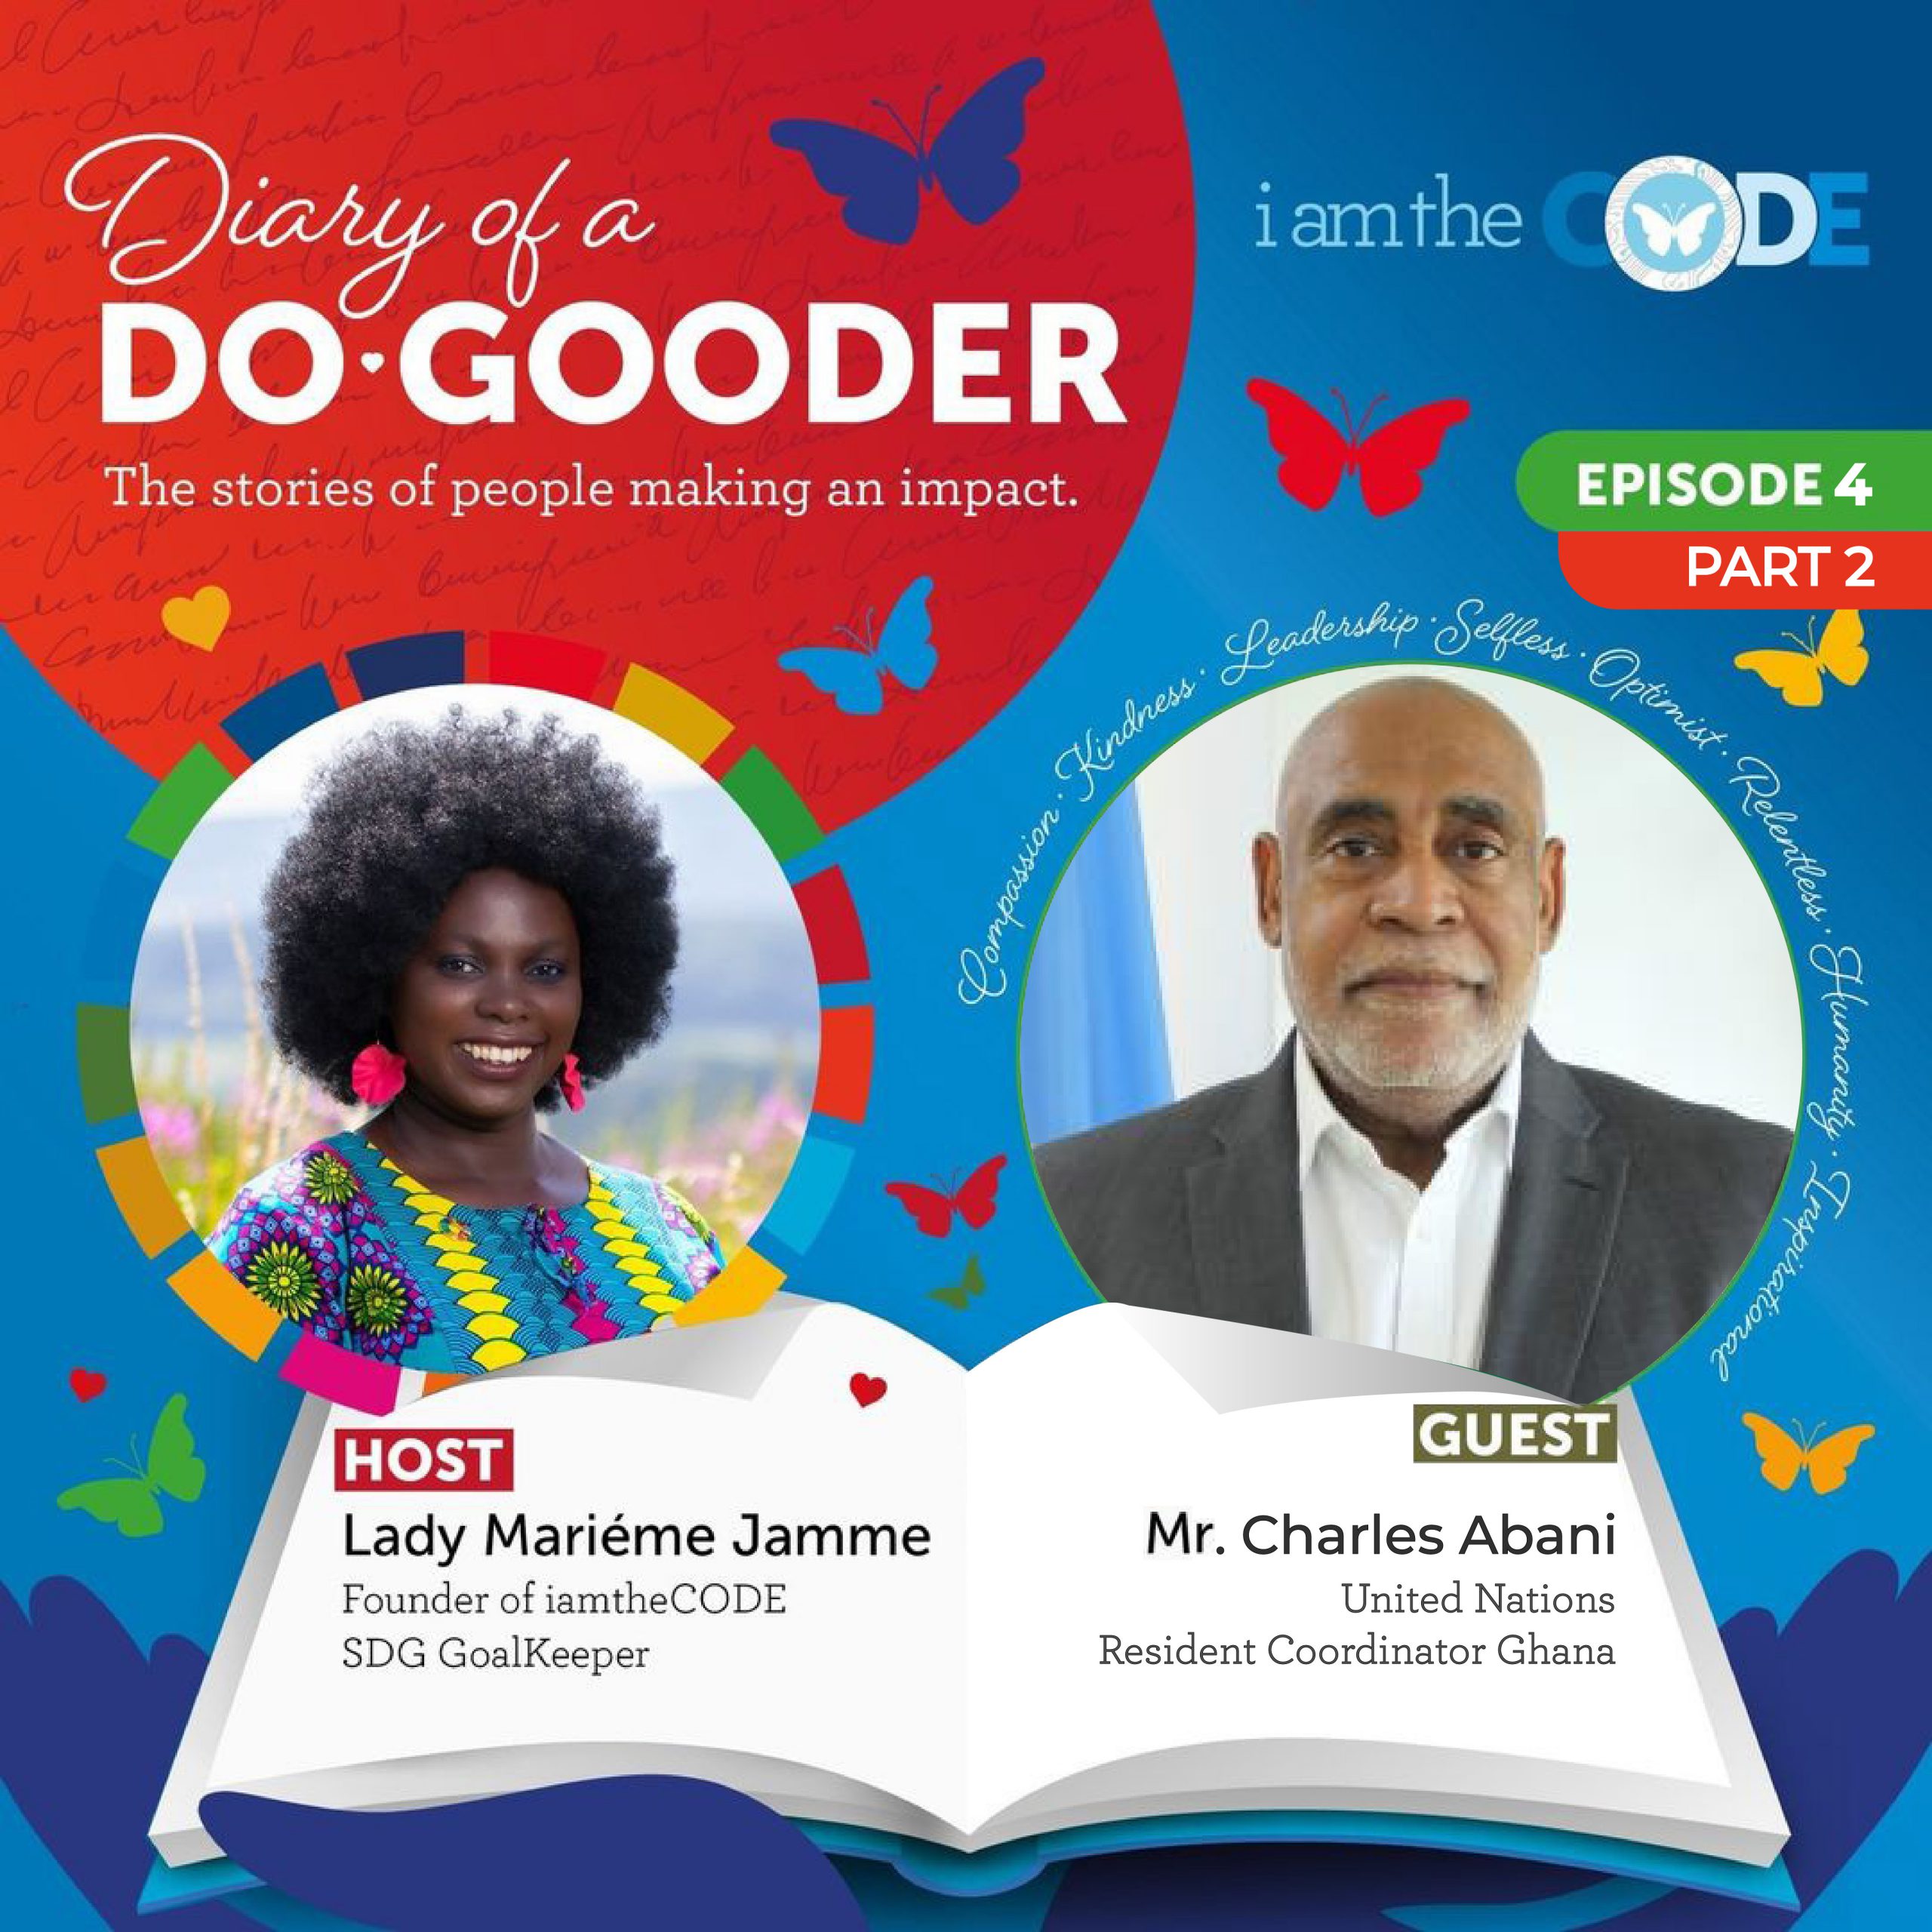 S7E4 Diary Of A Do-Gooder – Lessons On How To Be a Do-Gooder with Charles Abani (Part 2)